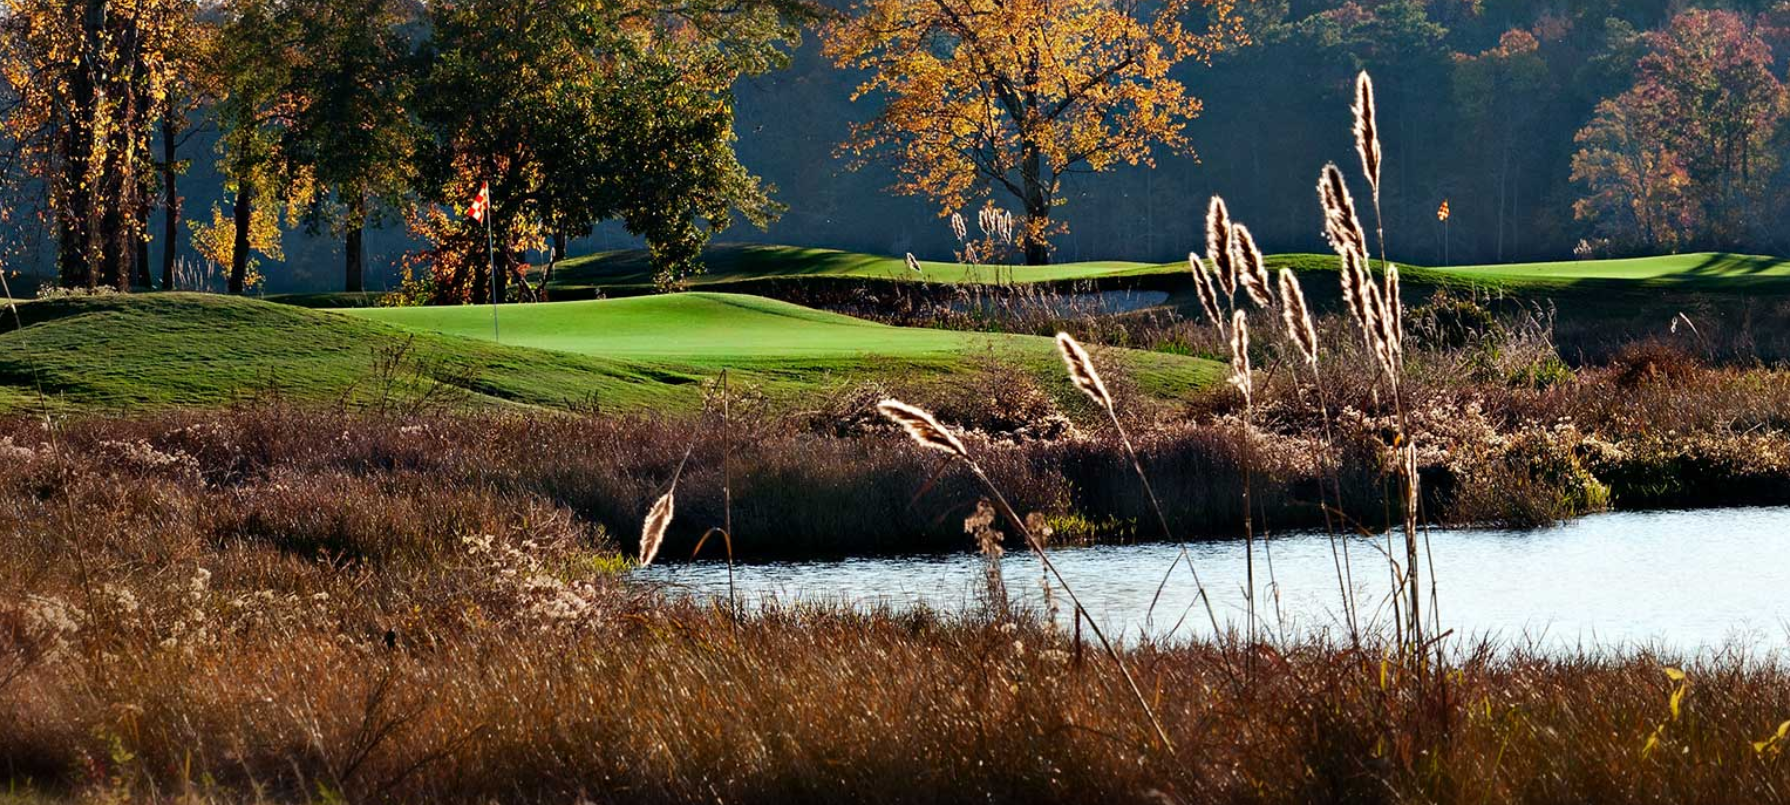 Golf Vacation Package - RTJ Golf Trail - Grand National Stay & Play from $159 per day!